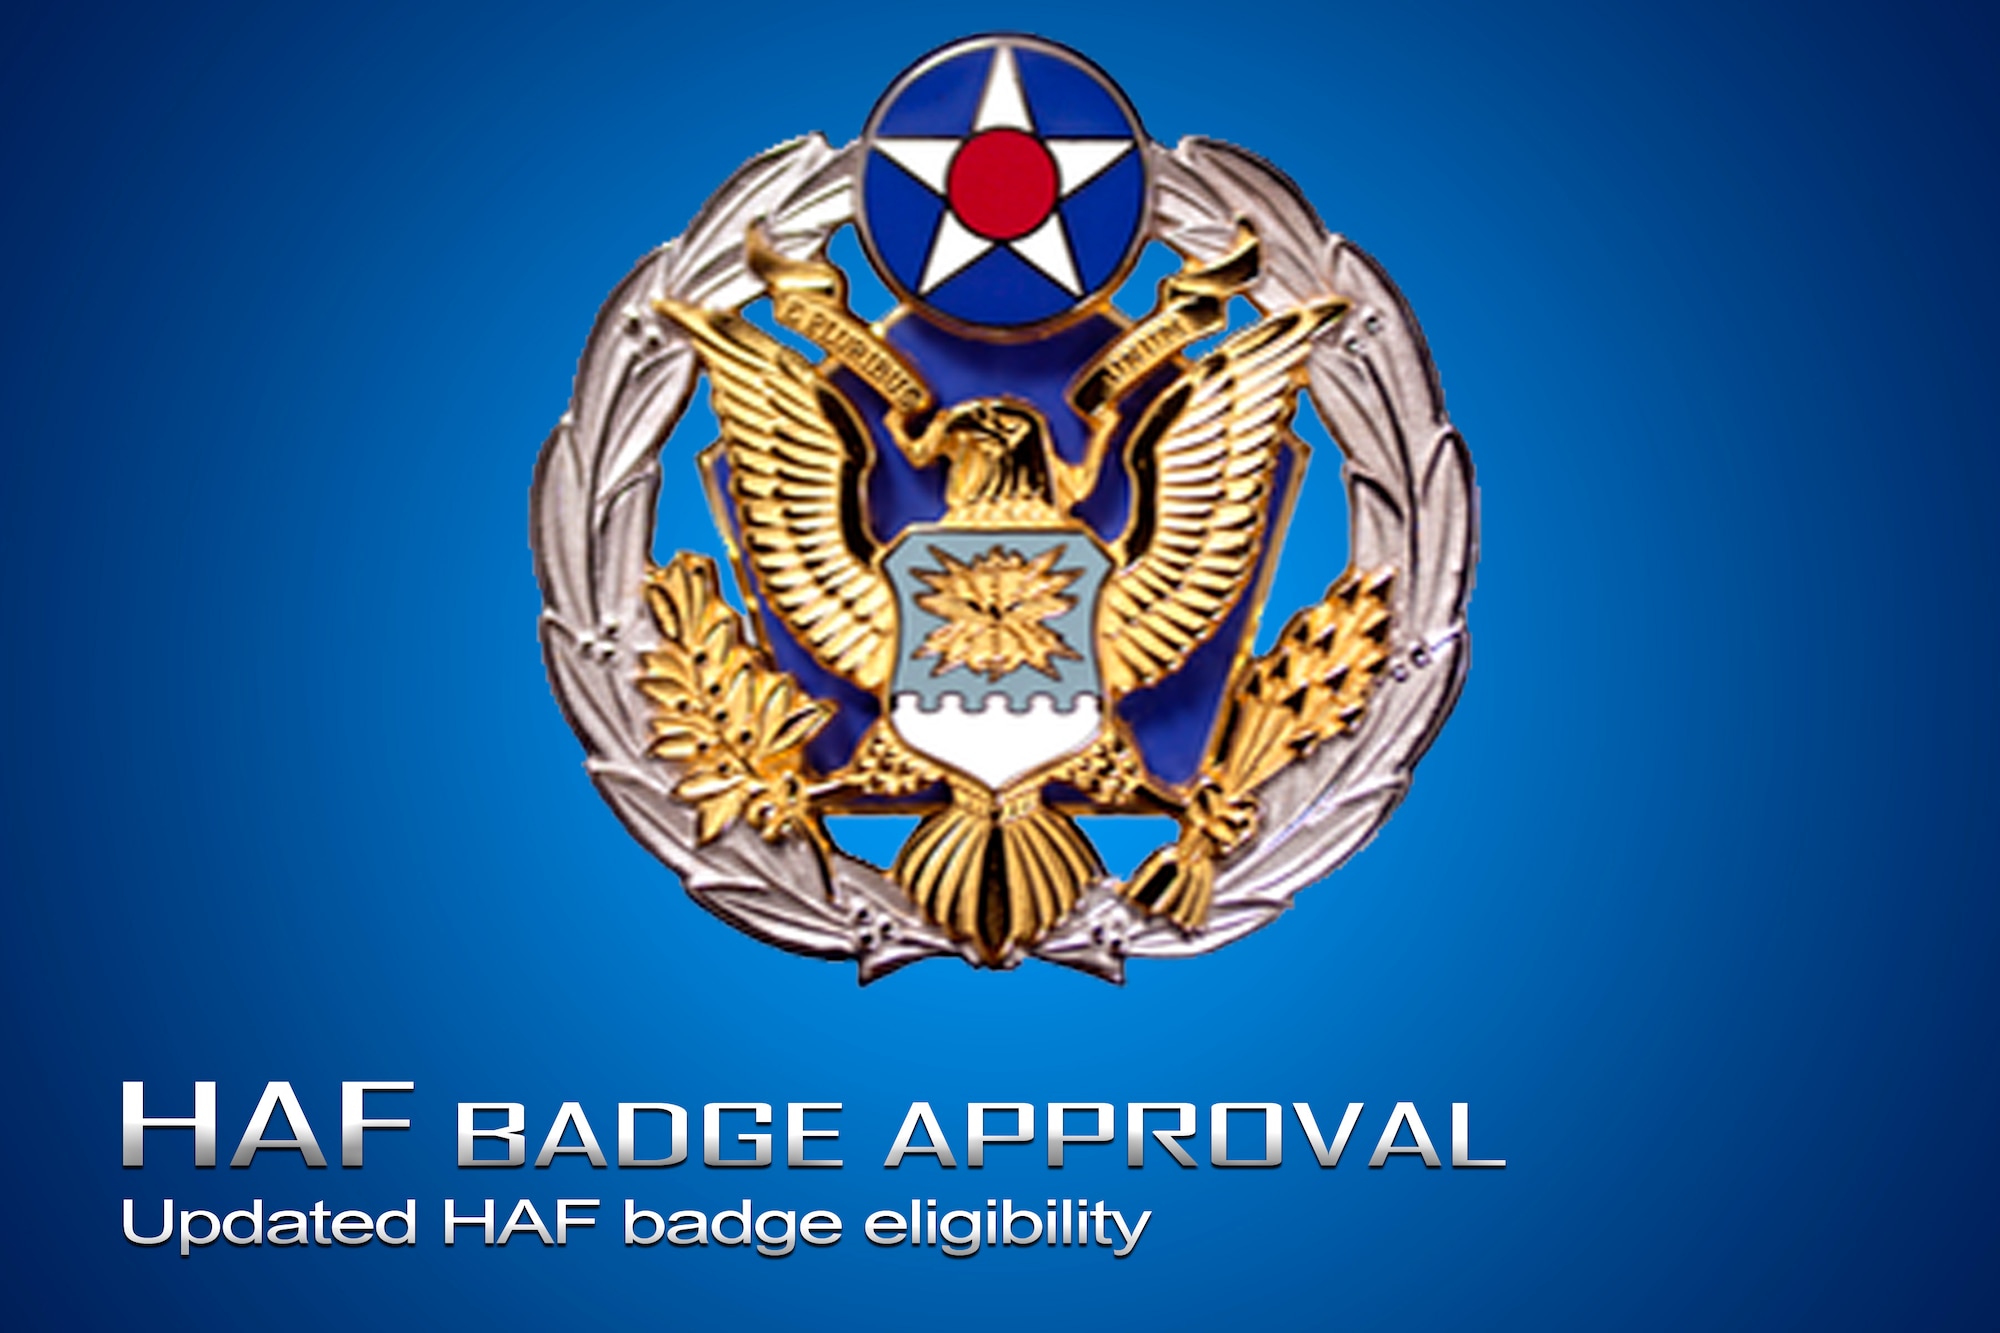 Headquarters US Air Force Badge has now been approved for the United States Air Force Honor Guard to wear after completion of ceremonial duties.